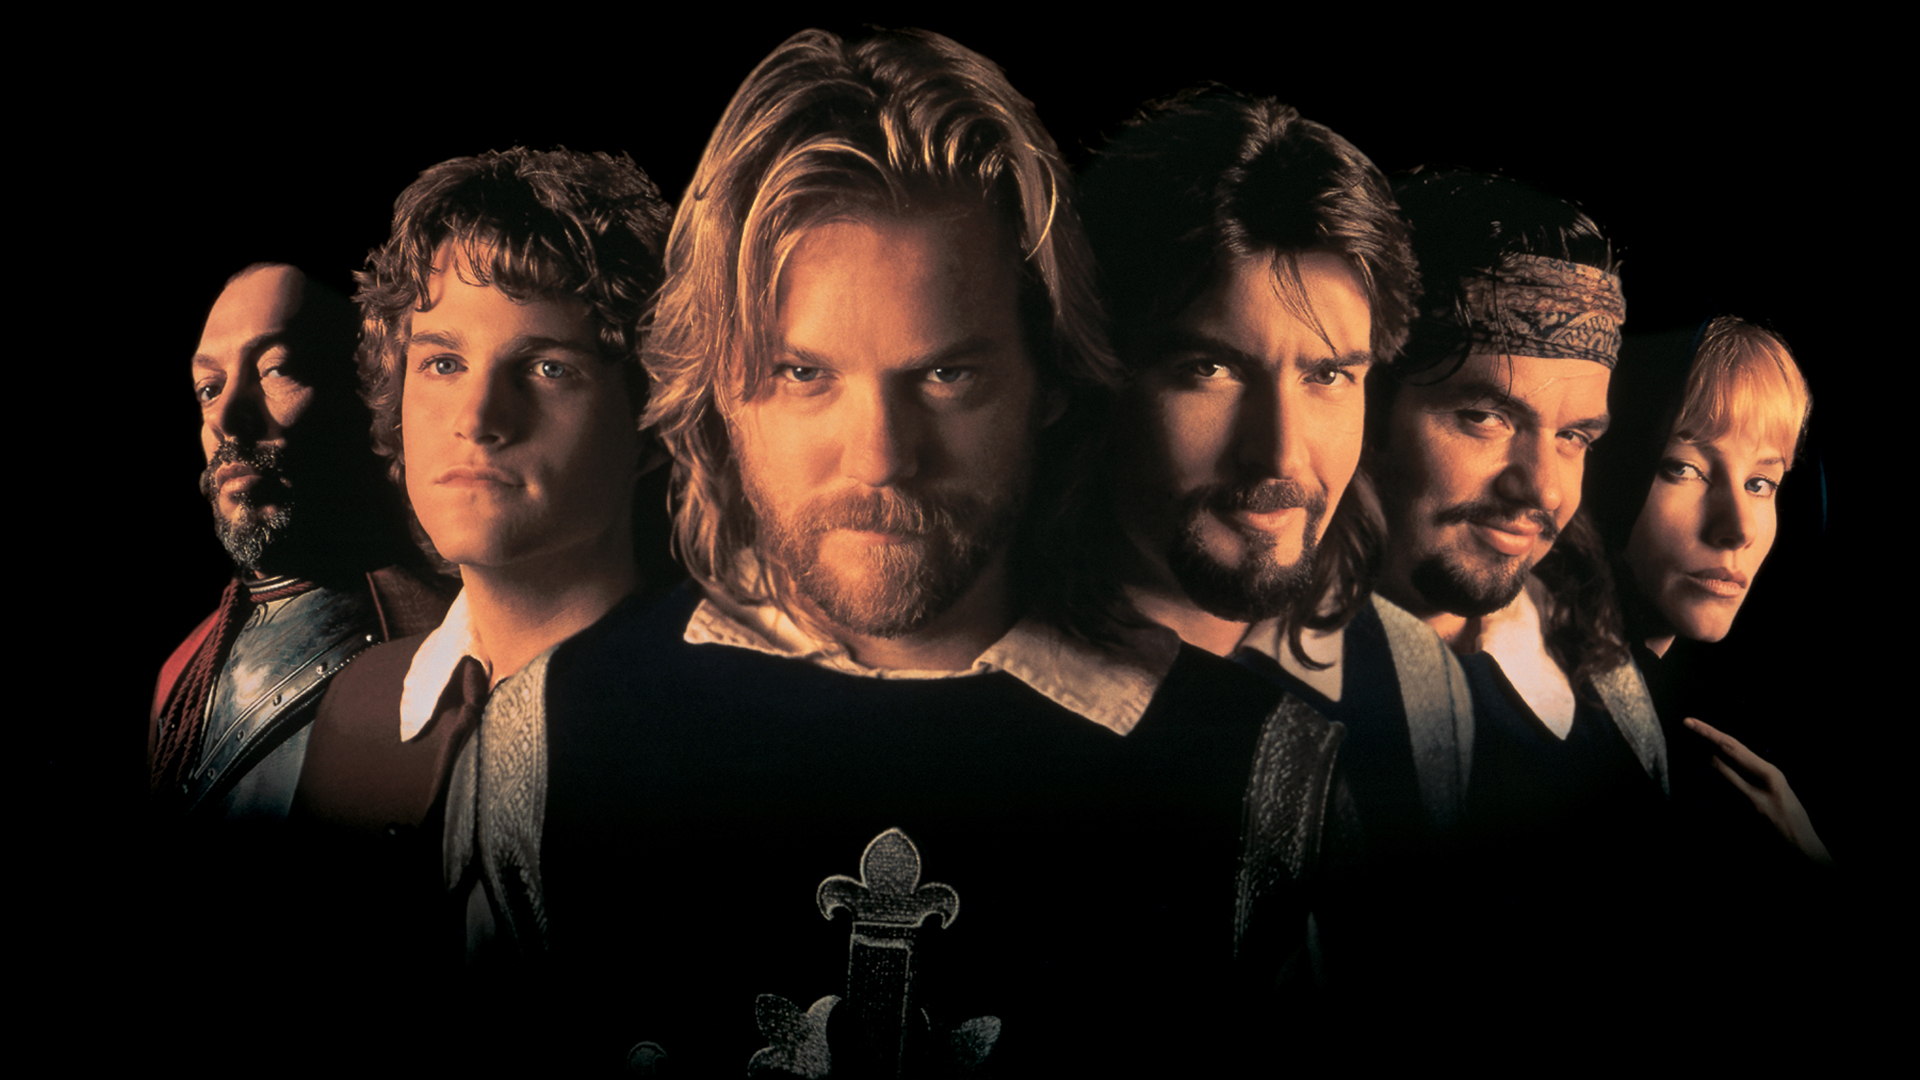 movie, the three musketeers (1993), charlie sheen, chris o'donnell, kiefer sutherland, oliver platt, rebecca de mornay